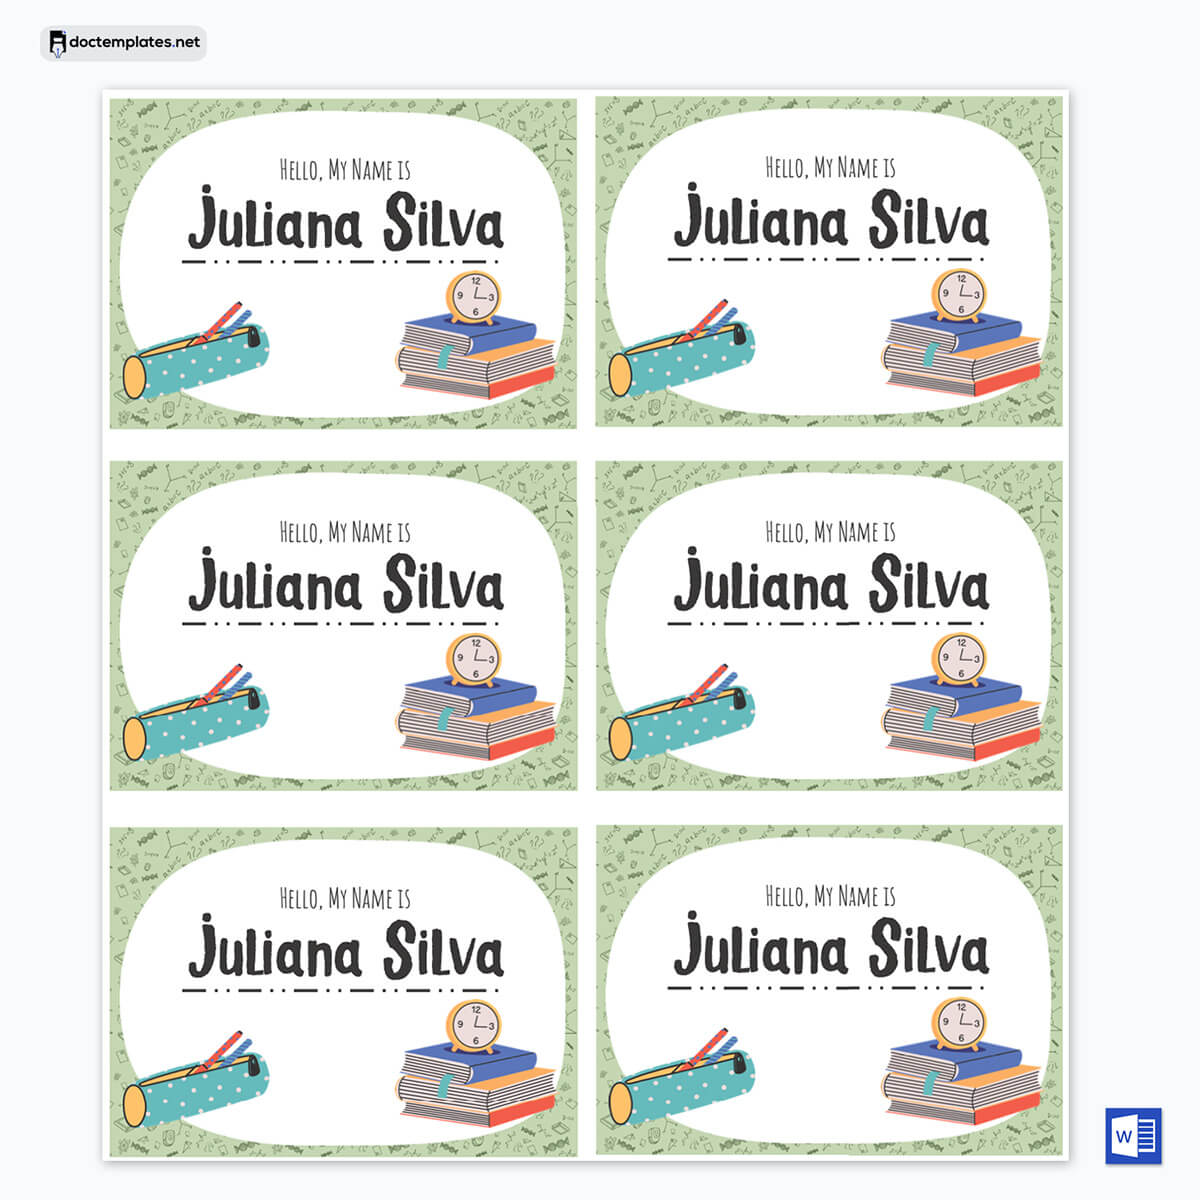 "Avery Name Tag Template Samples - Editable and Print-Ready"